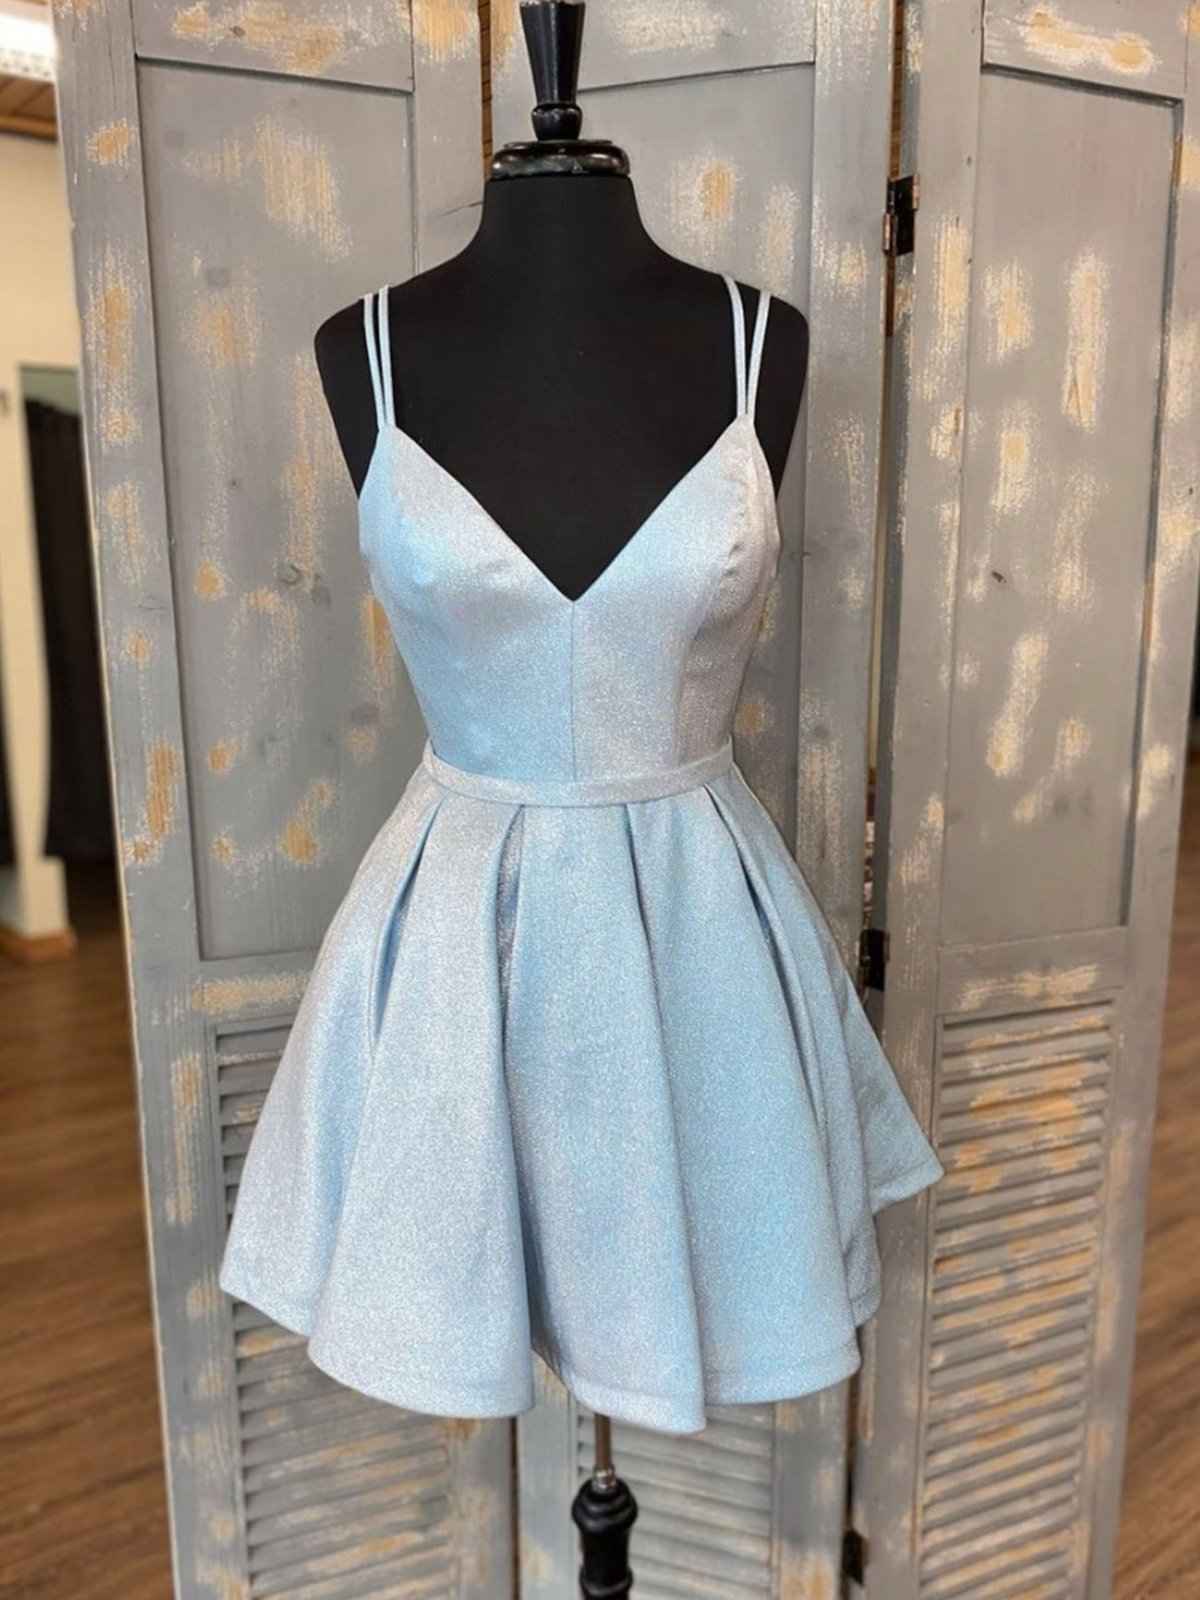 Prom Dresses For Adults, A Line V Neck Short Light Blue Prom Dresses, Short V Neck Light Blue Formal Homecoming Dresses